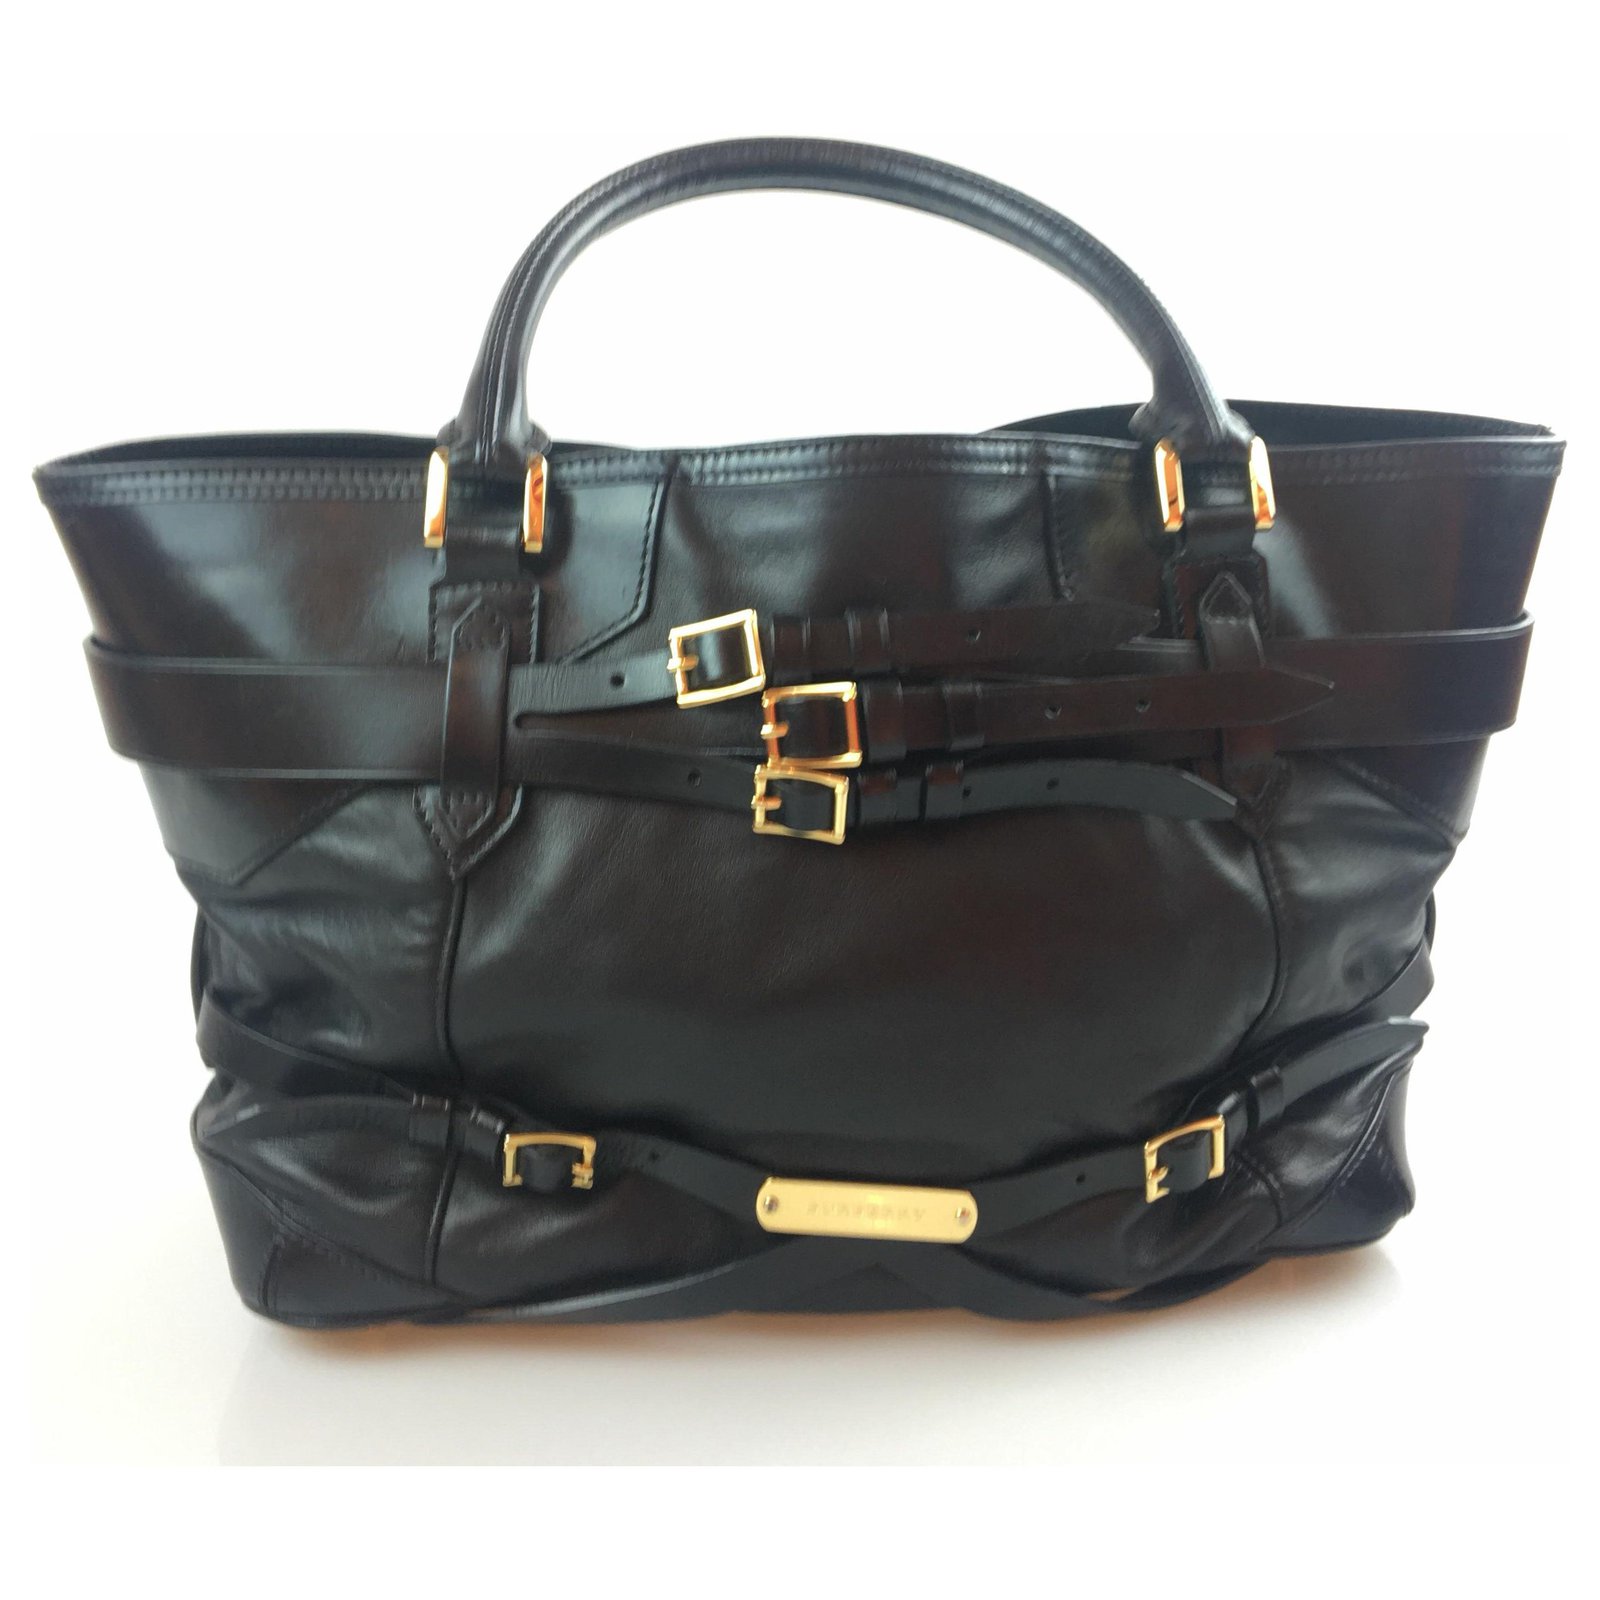 Burberry Tote - Bridle House Check Medium Lynher